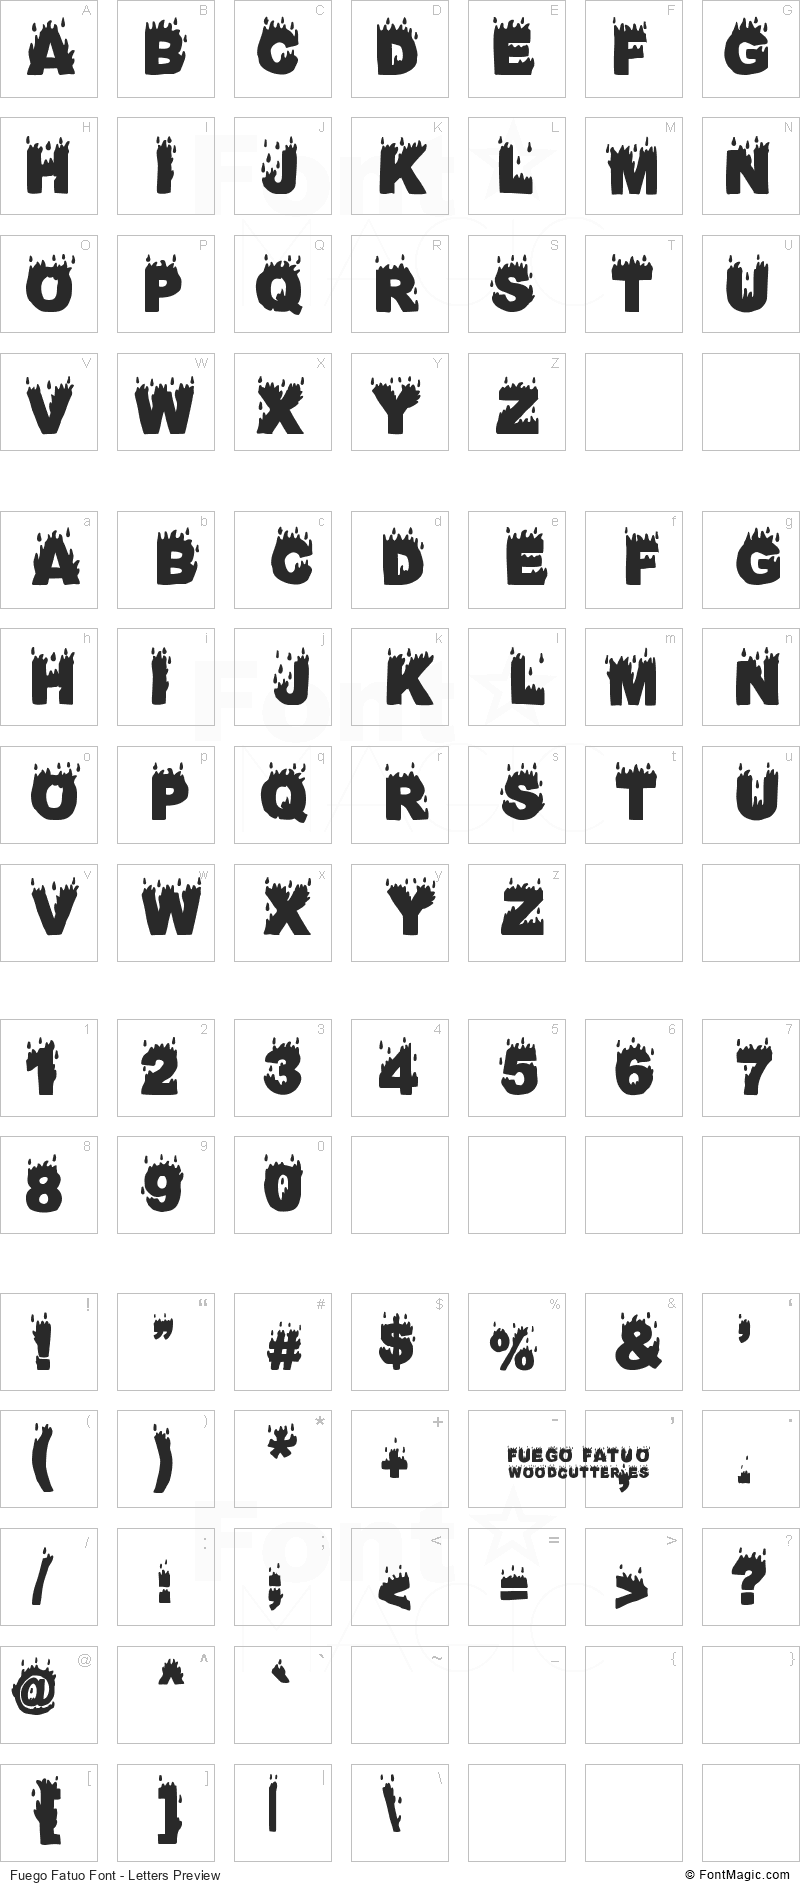 Fuego Fatuo Font - All Latters Preview Chart